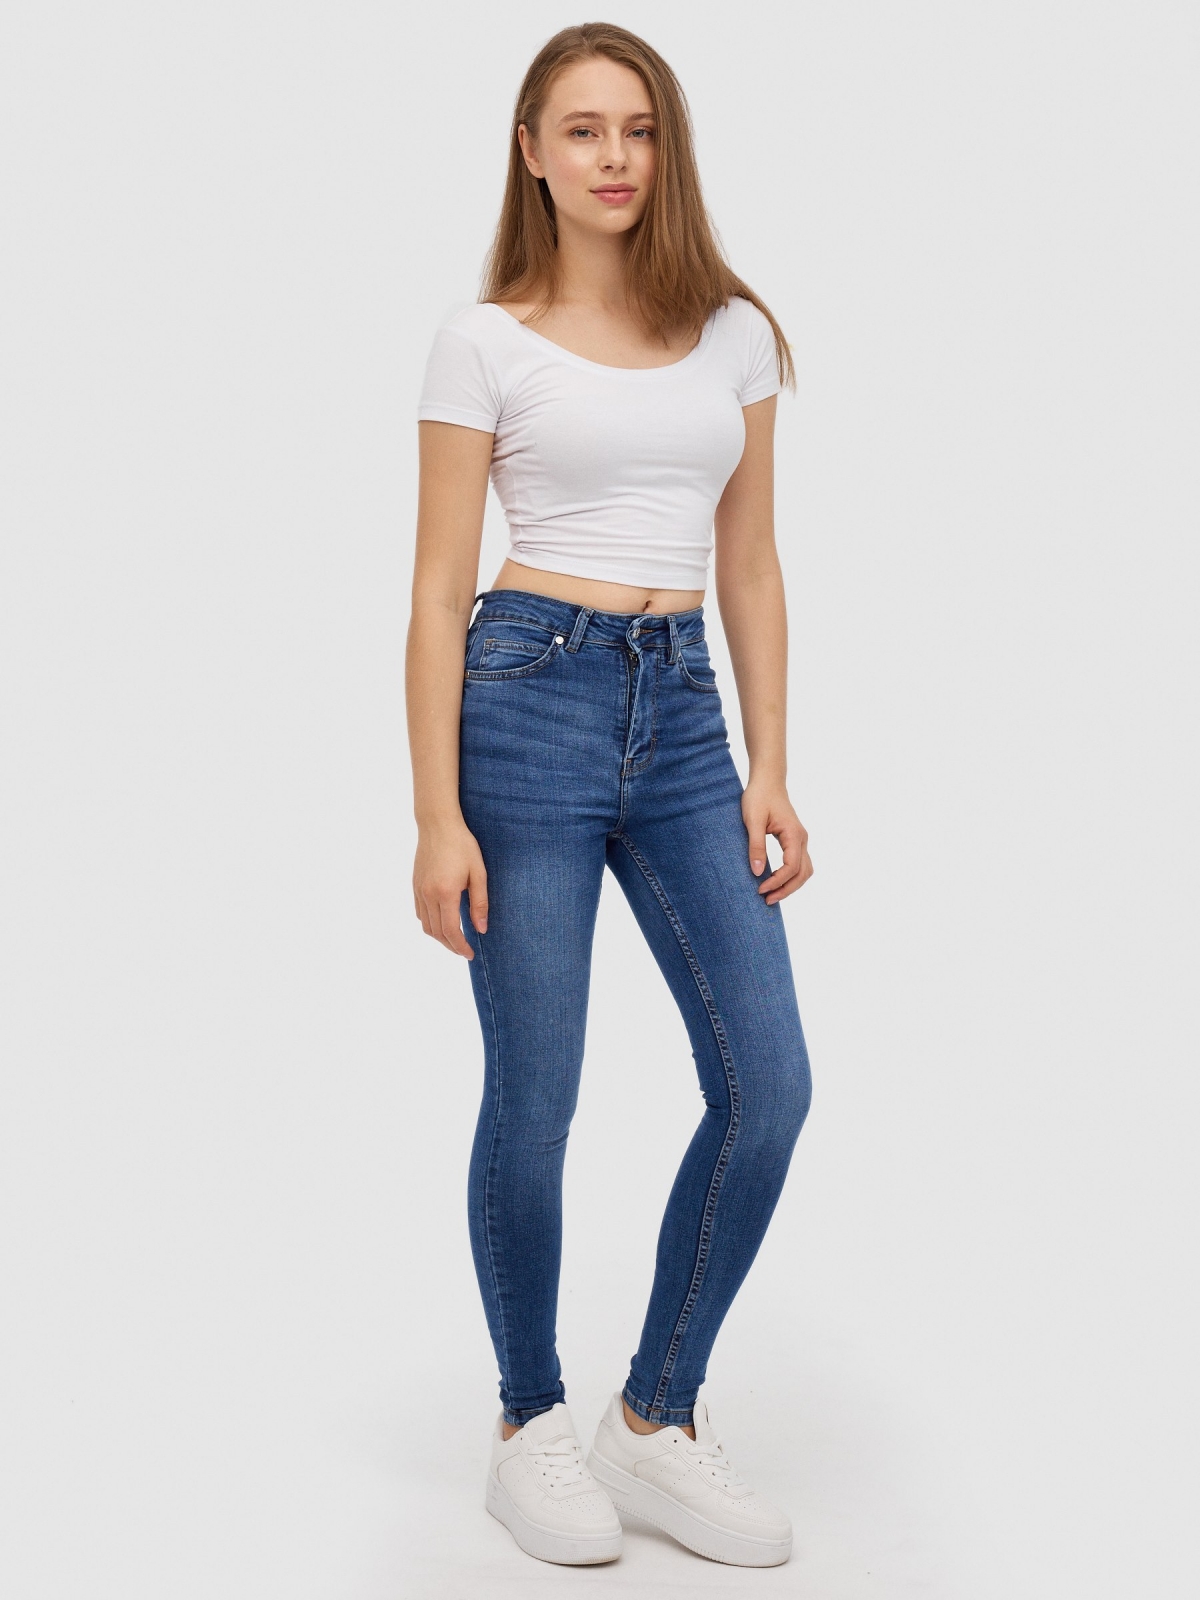 Skinny jeans push up high rise